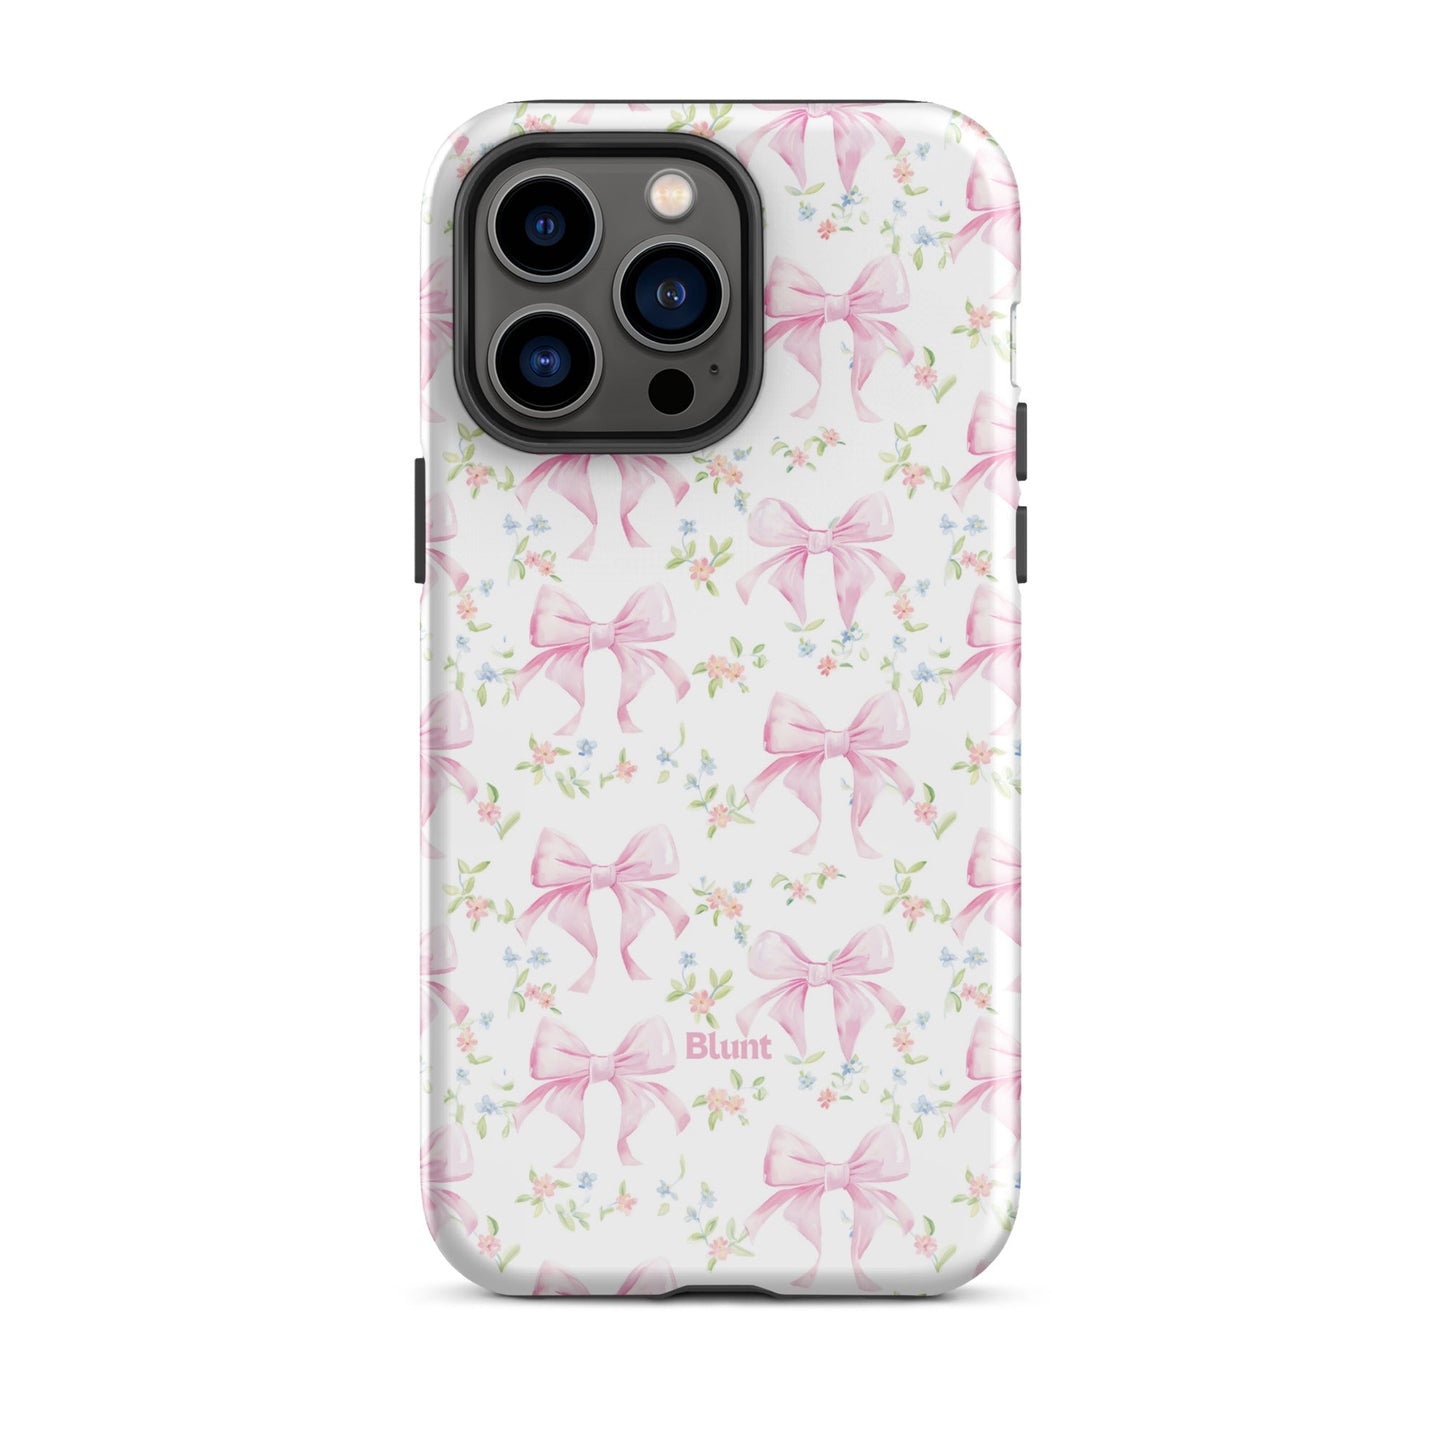 Polly iPhone Case - blunt cases